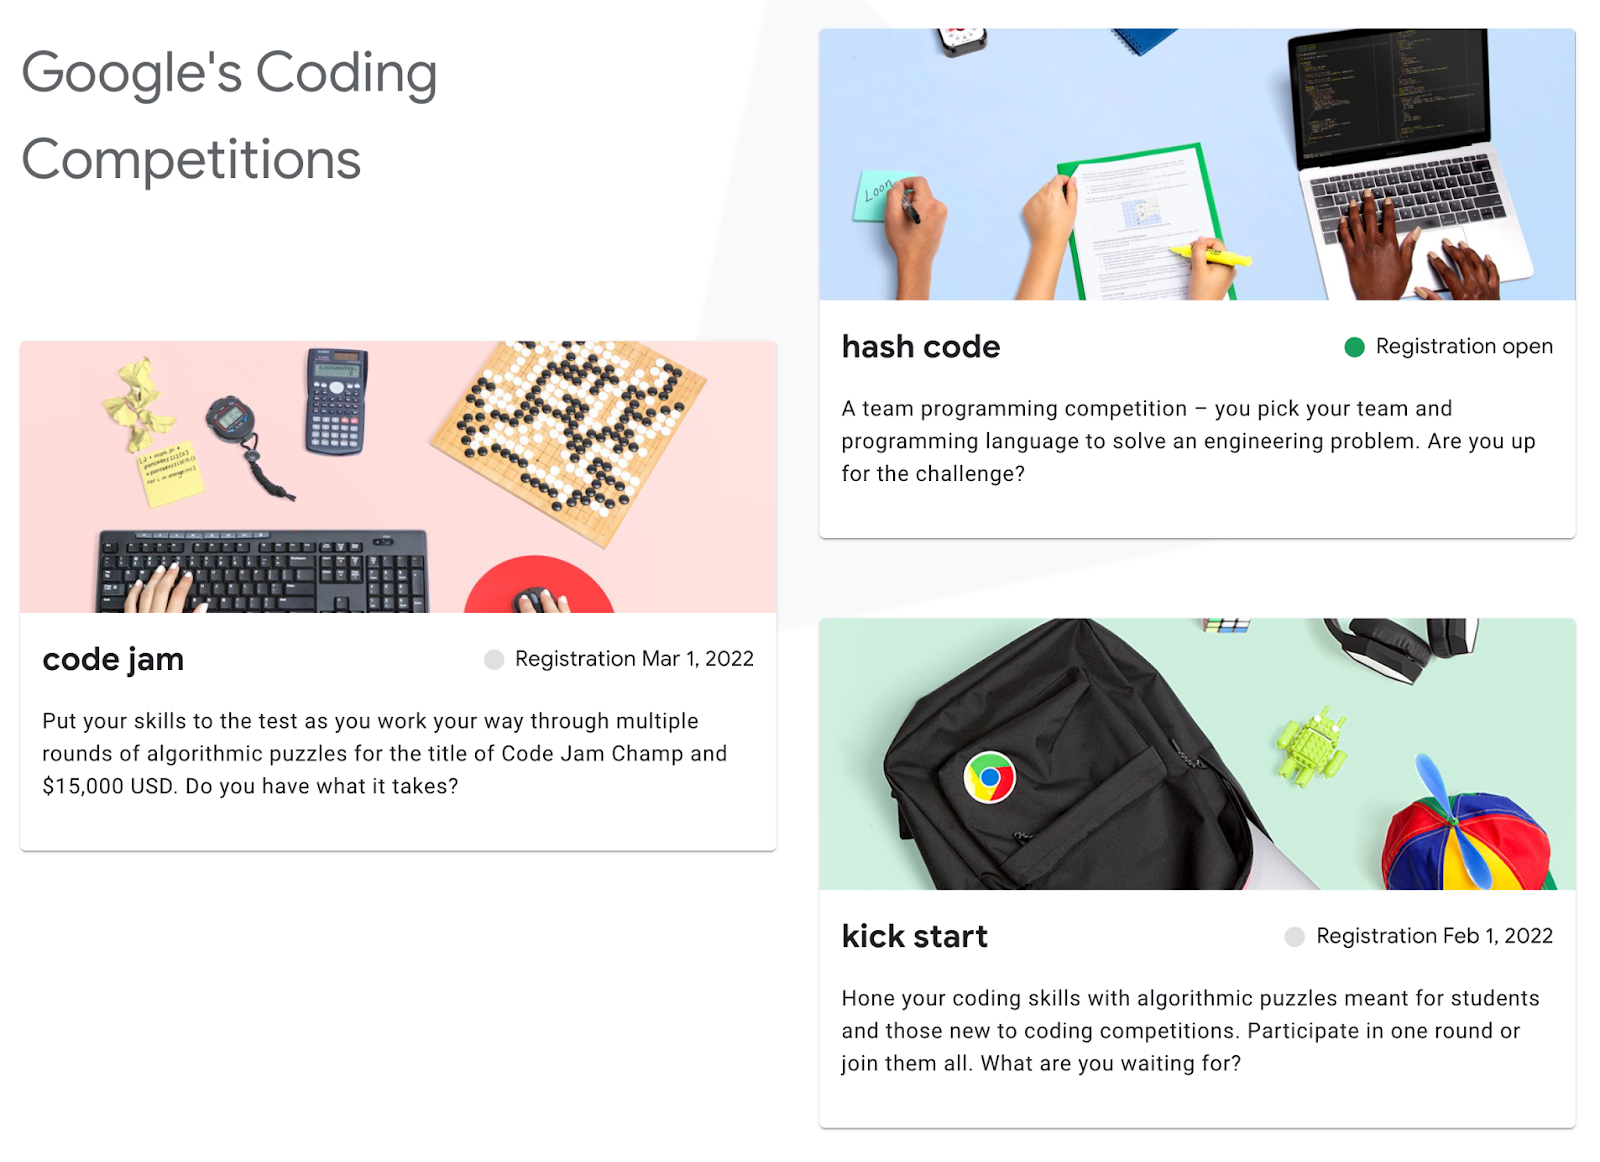 The unified website of Google’s Coding Competitions